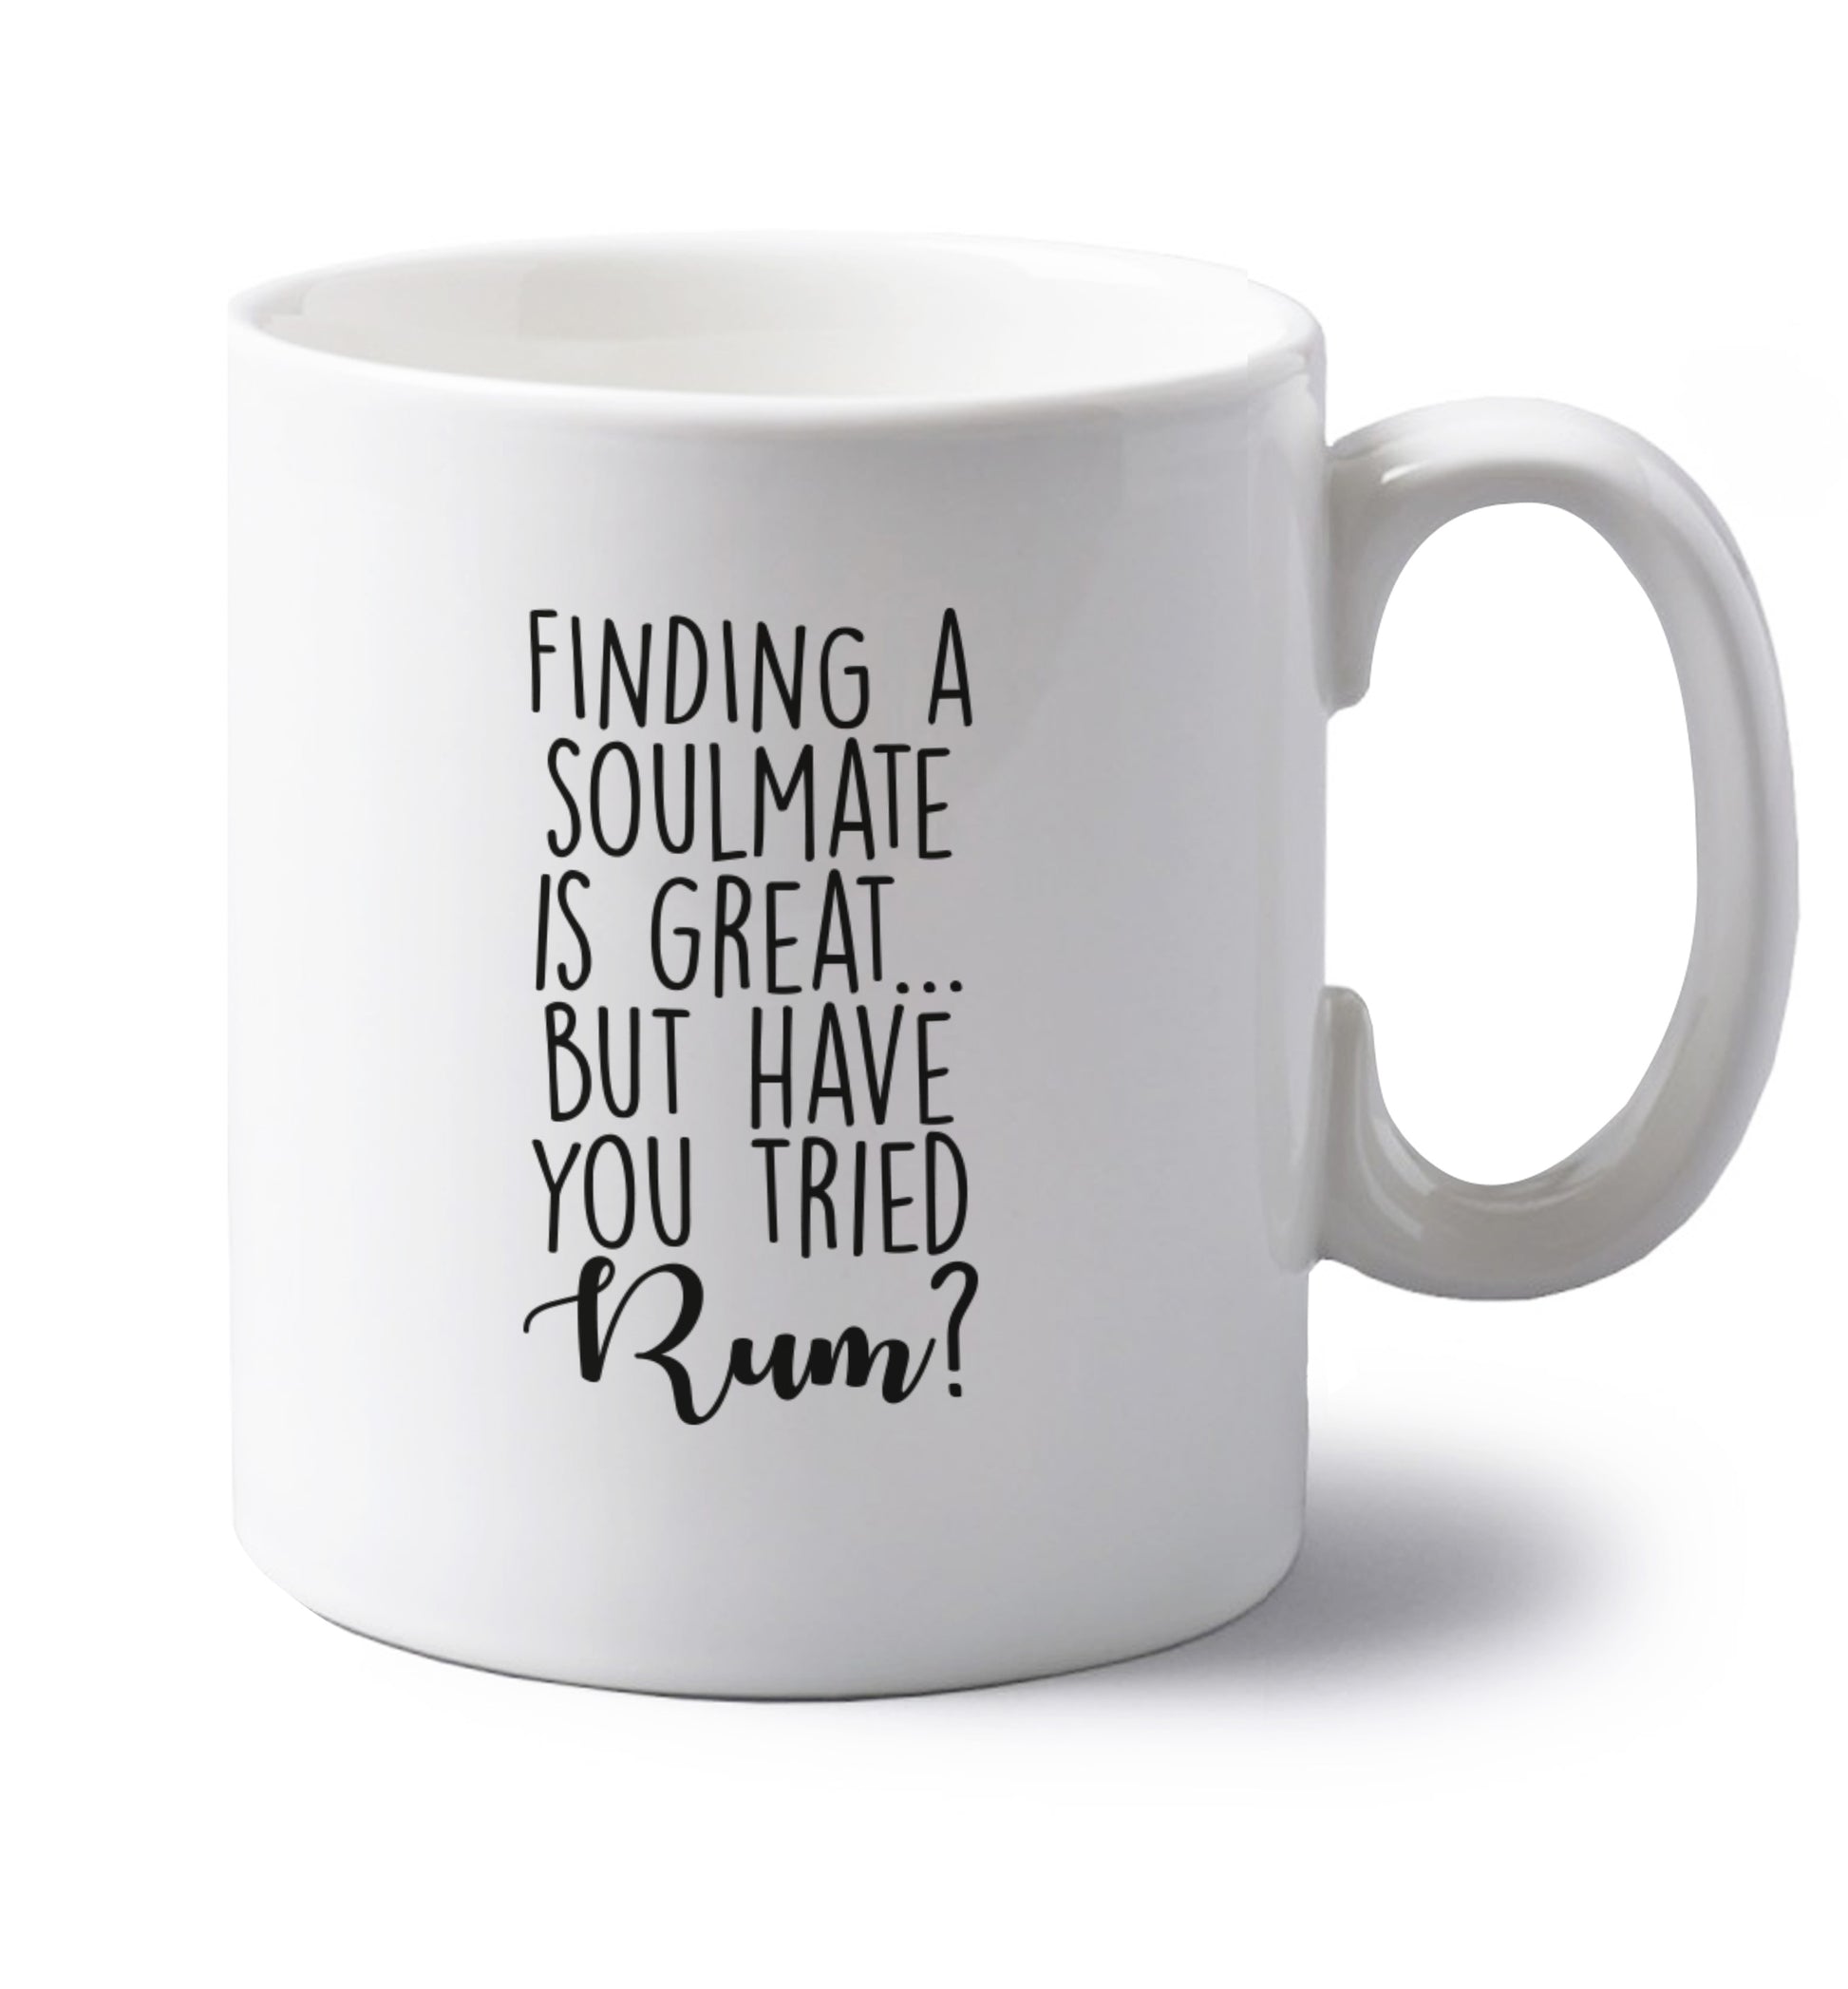 Finding a soulmate is great but have you tried rum? left handed white ceramic mug 